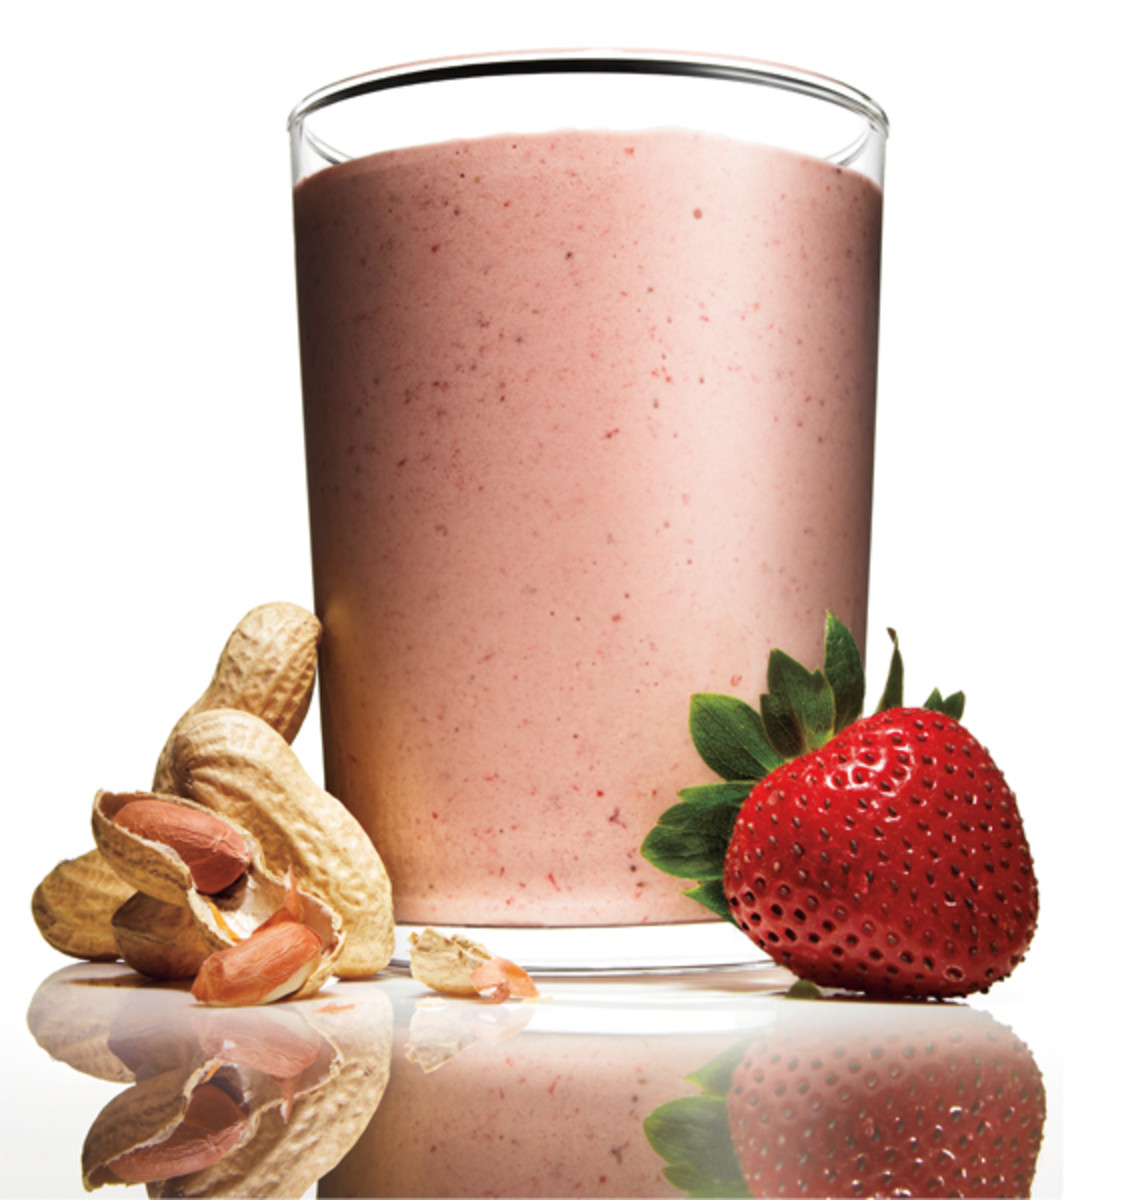 7 Bulking Smoothies to Build Muscle Fast | Men's Journal - Men's Journal